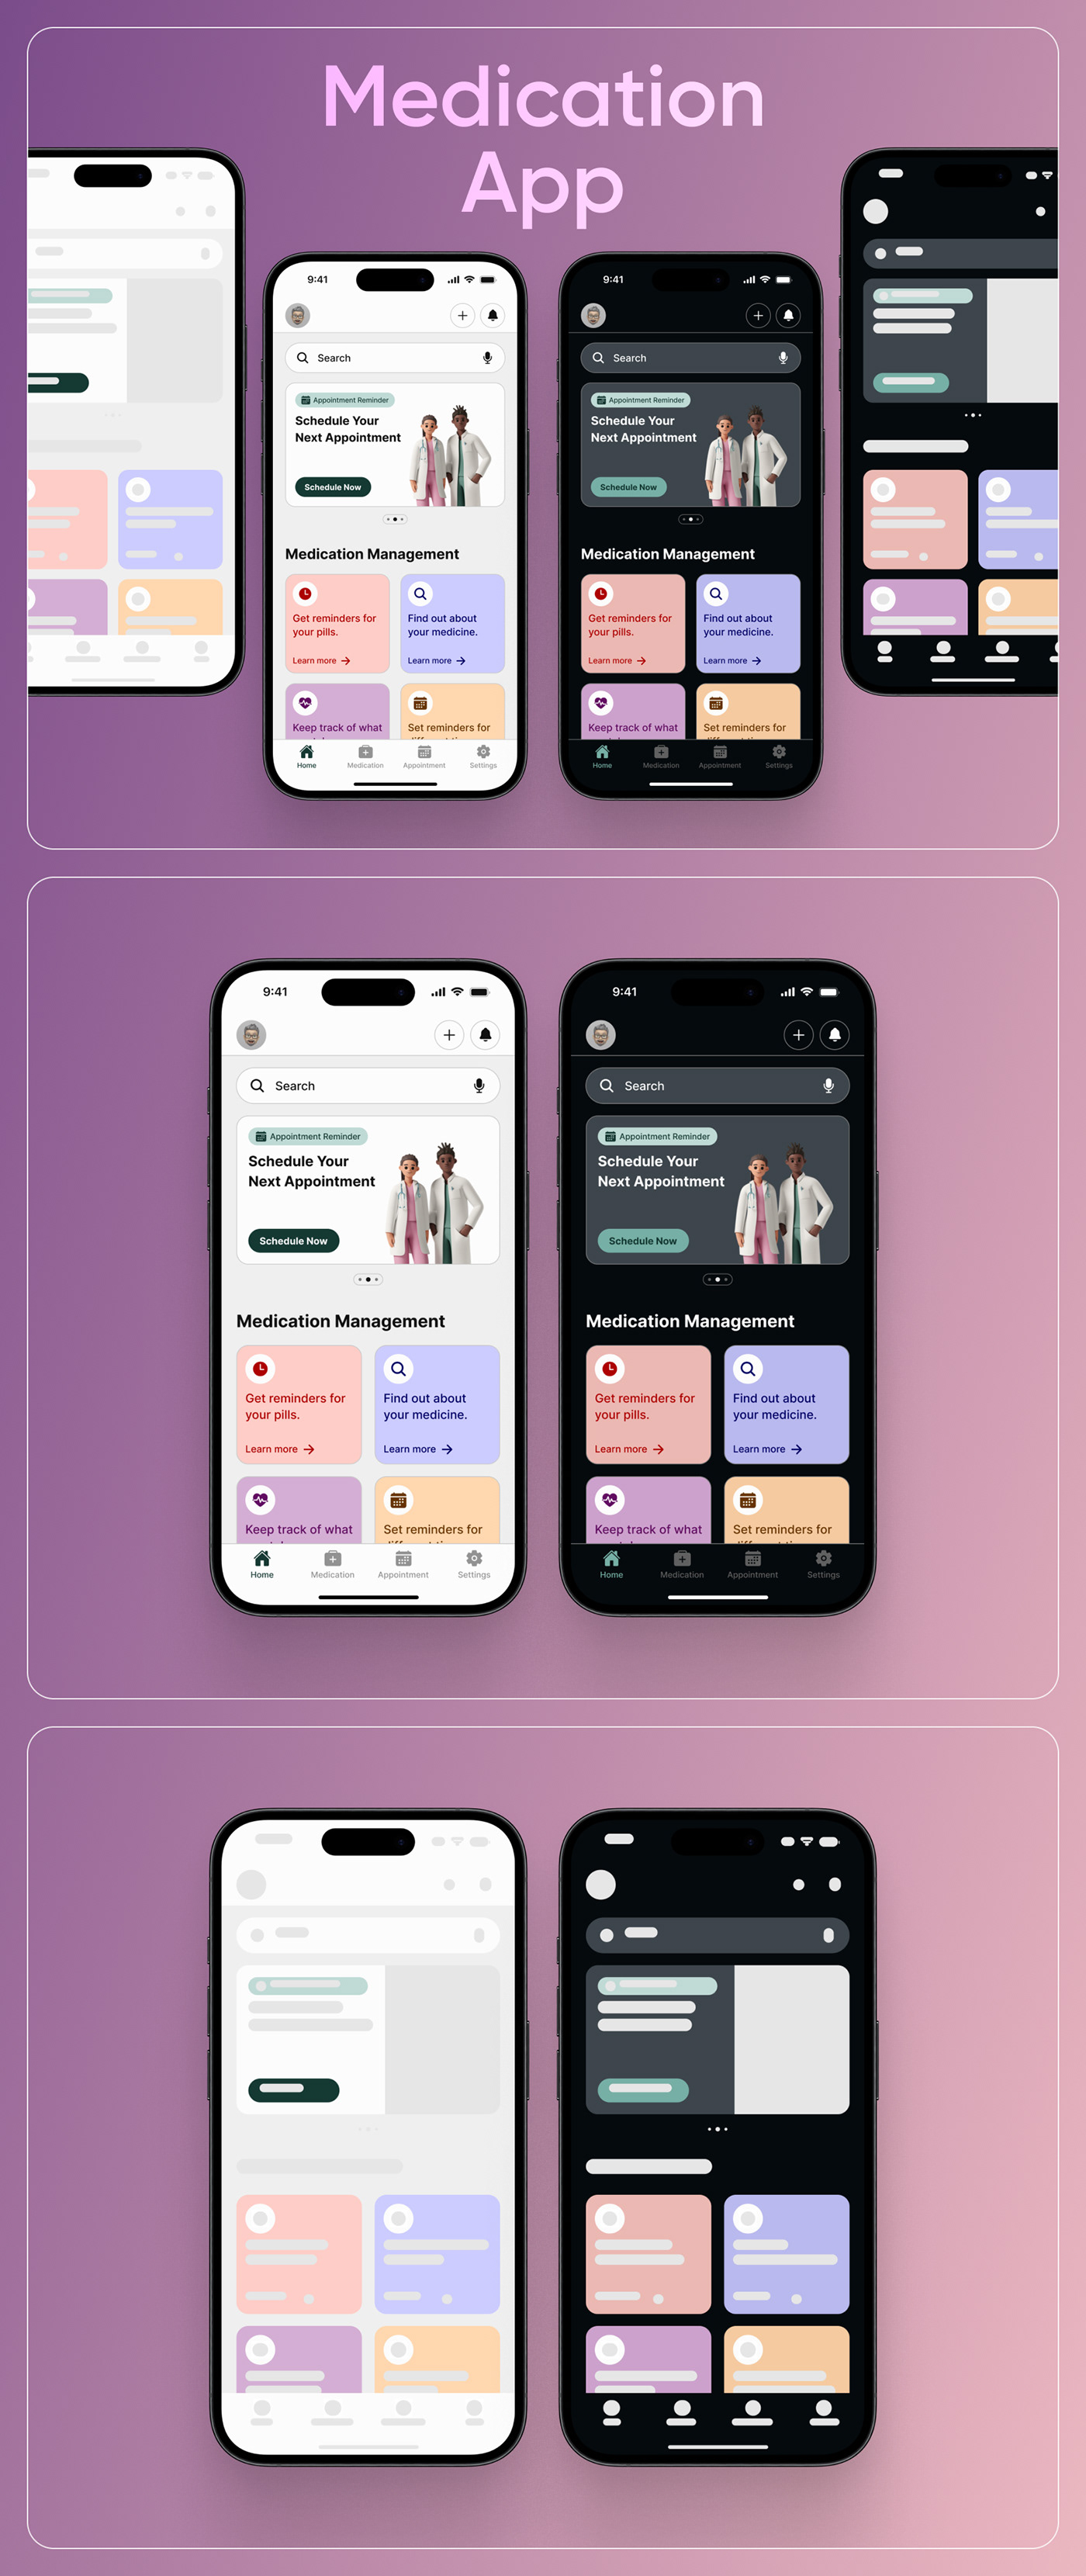 Medication App UI design with features like schedule appointment, get remainders for your pills, etc